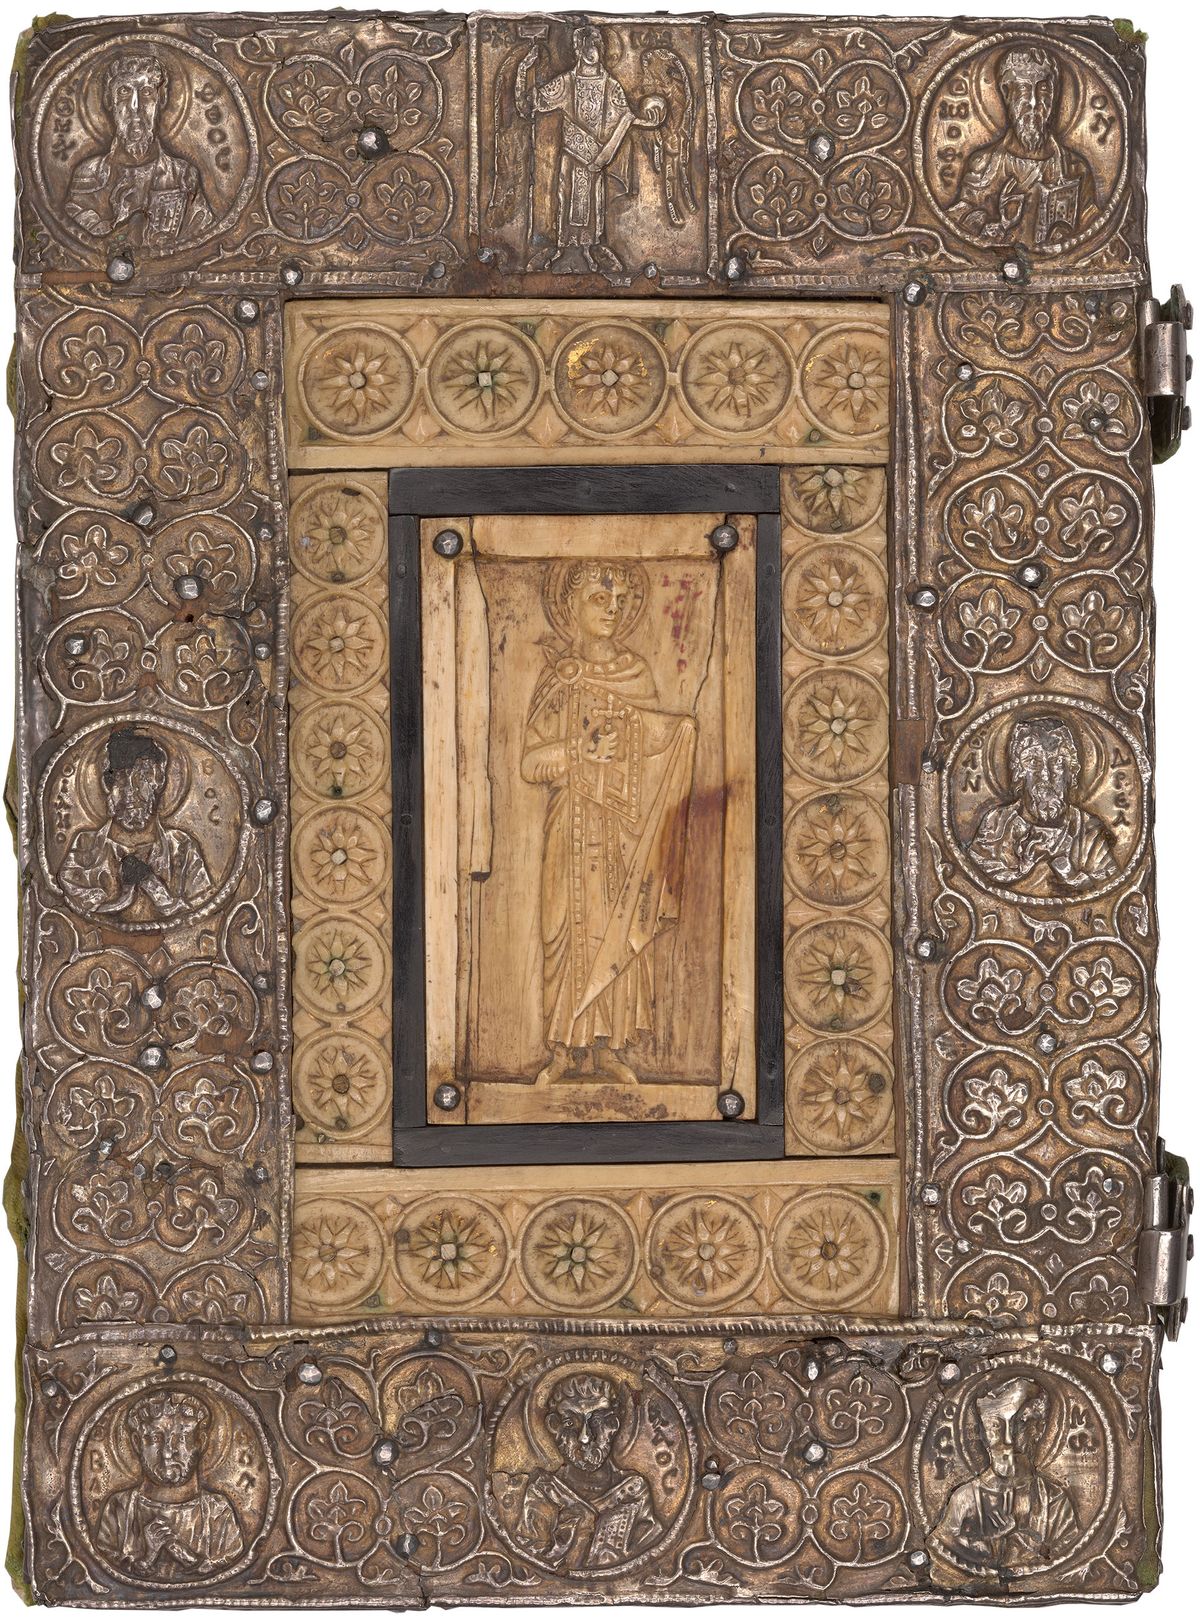 A sacramentary in the Morgan Library & Museum's collection that is thought to date to around 1050 Morgan Library & Museum